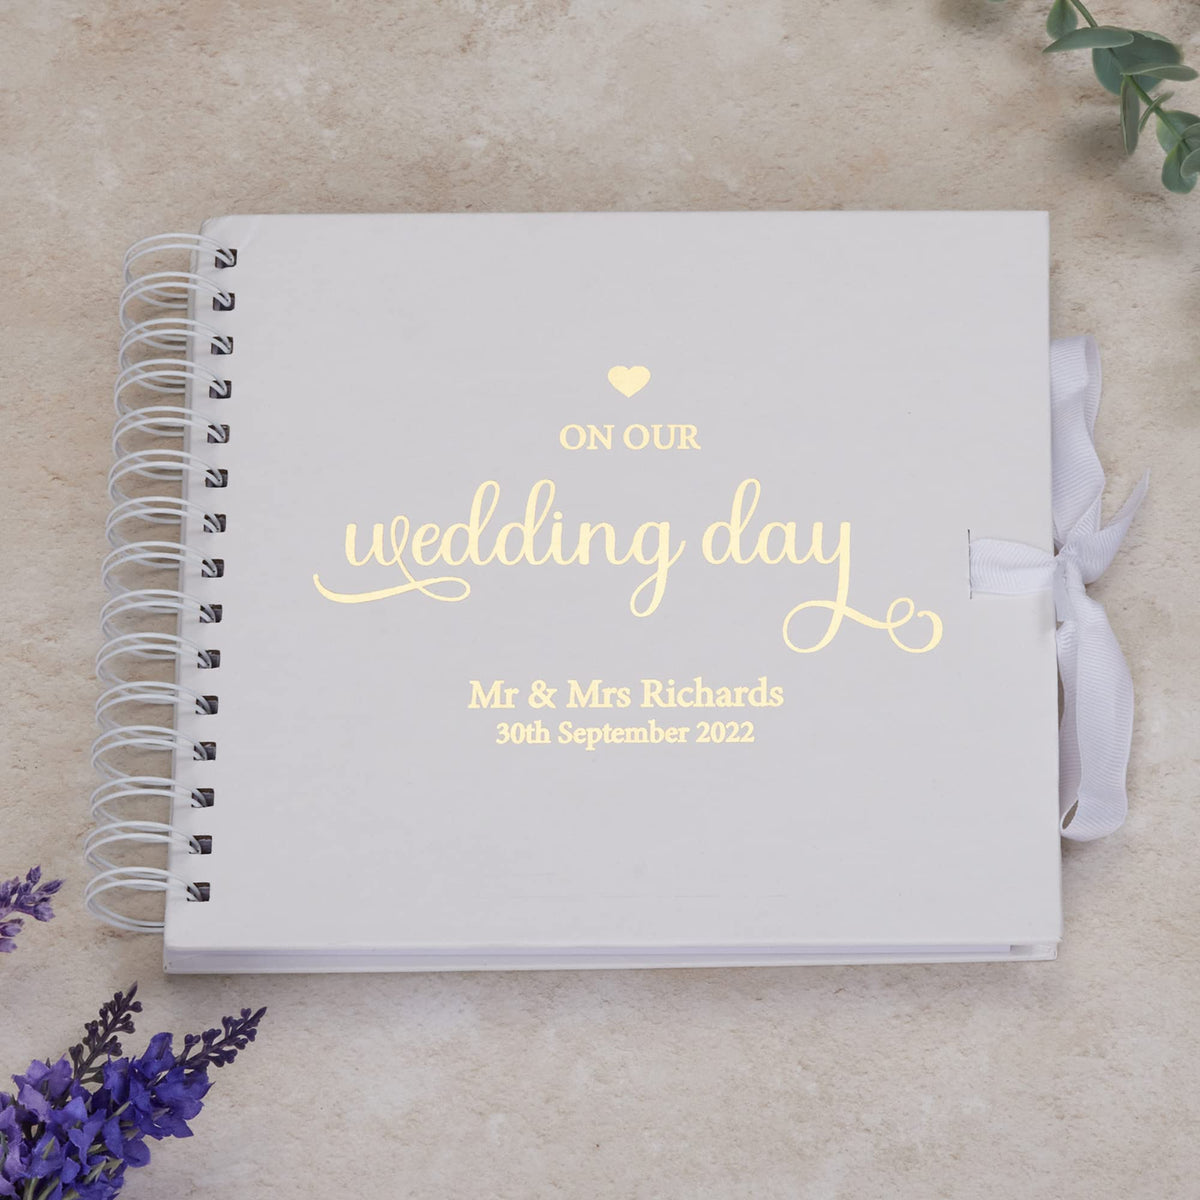 Personalised Our Wedding Day Guest Book Scrapbook or Photo Album Gift